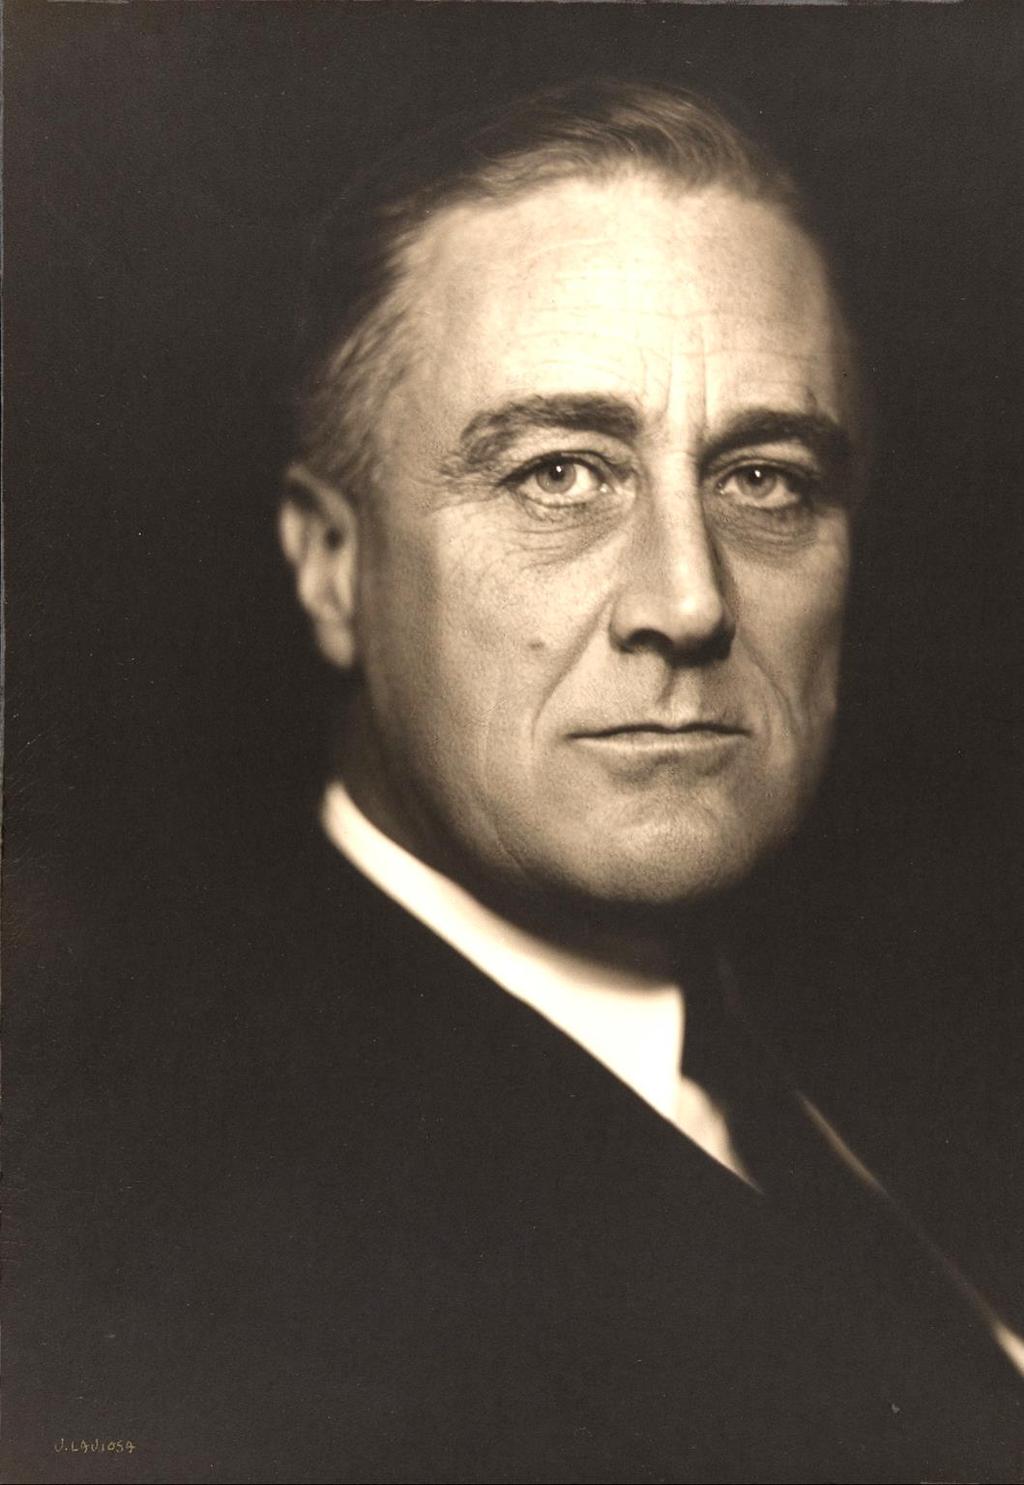 [I]t is certain that Franklin Roosevelt will rank among the greatest of